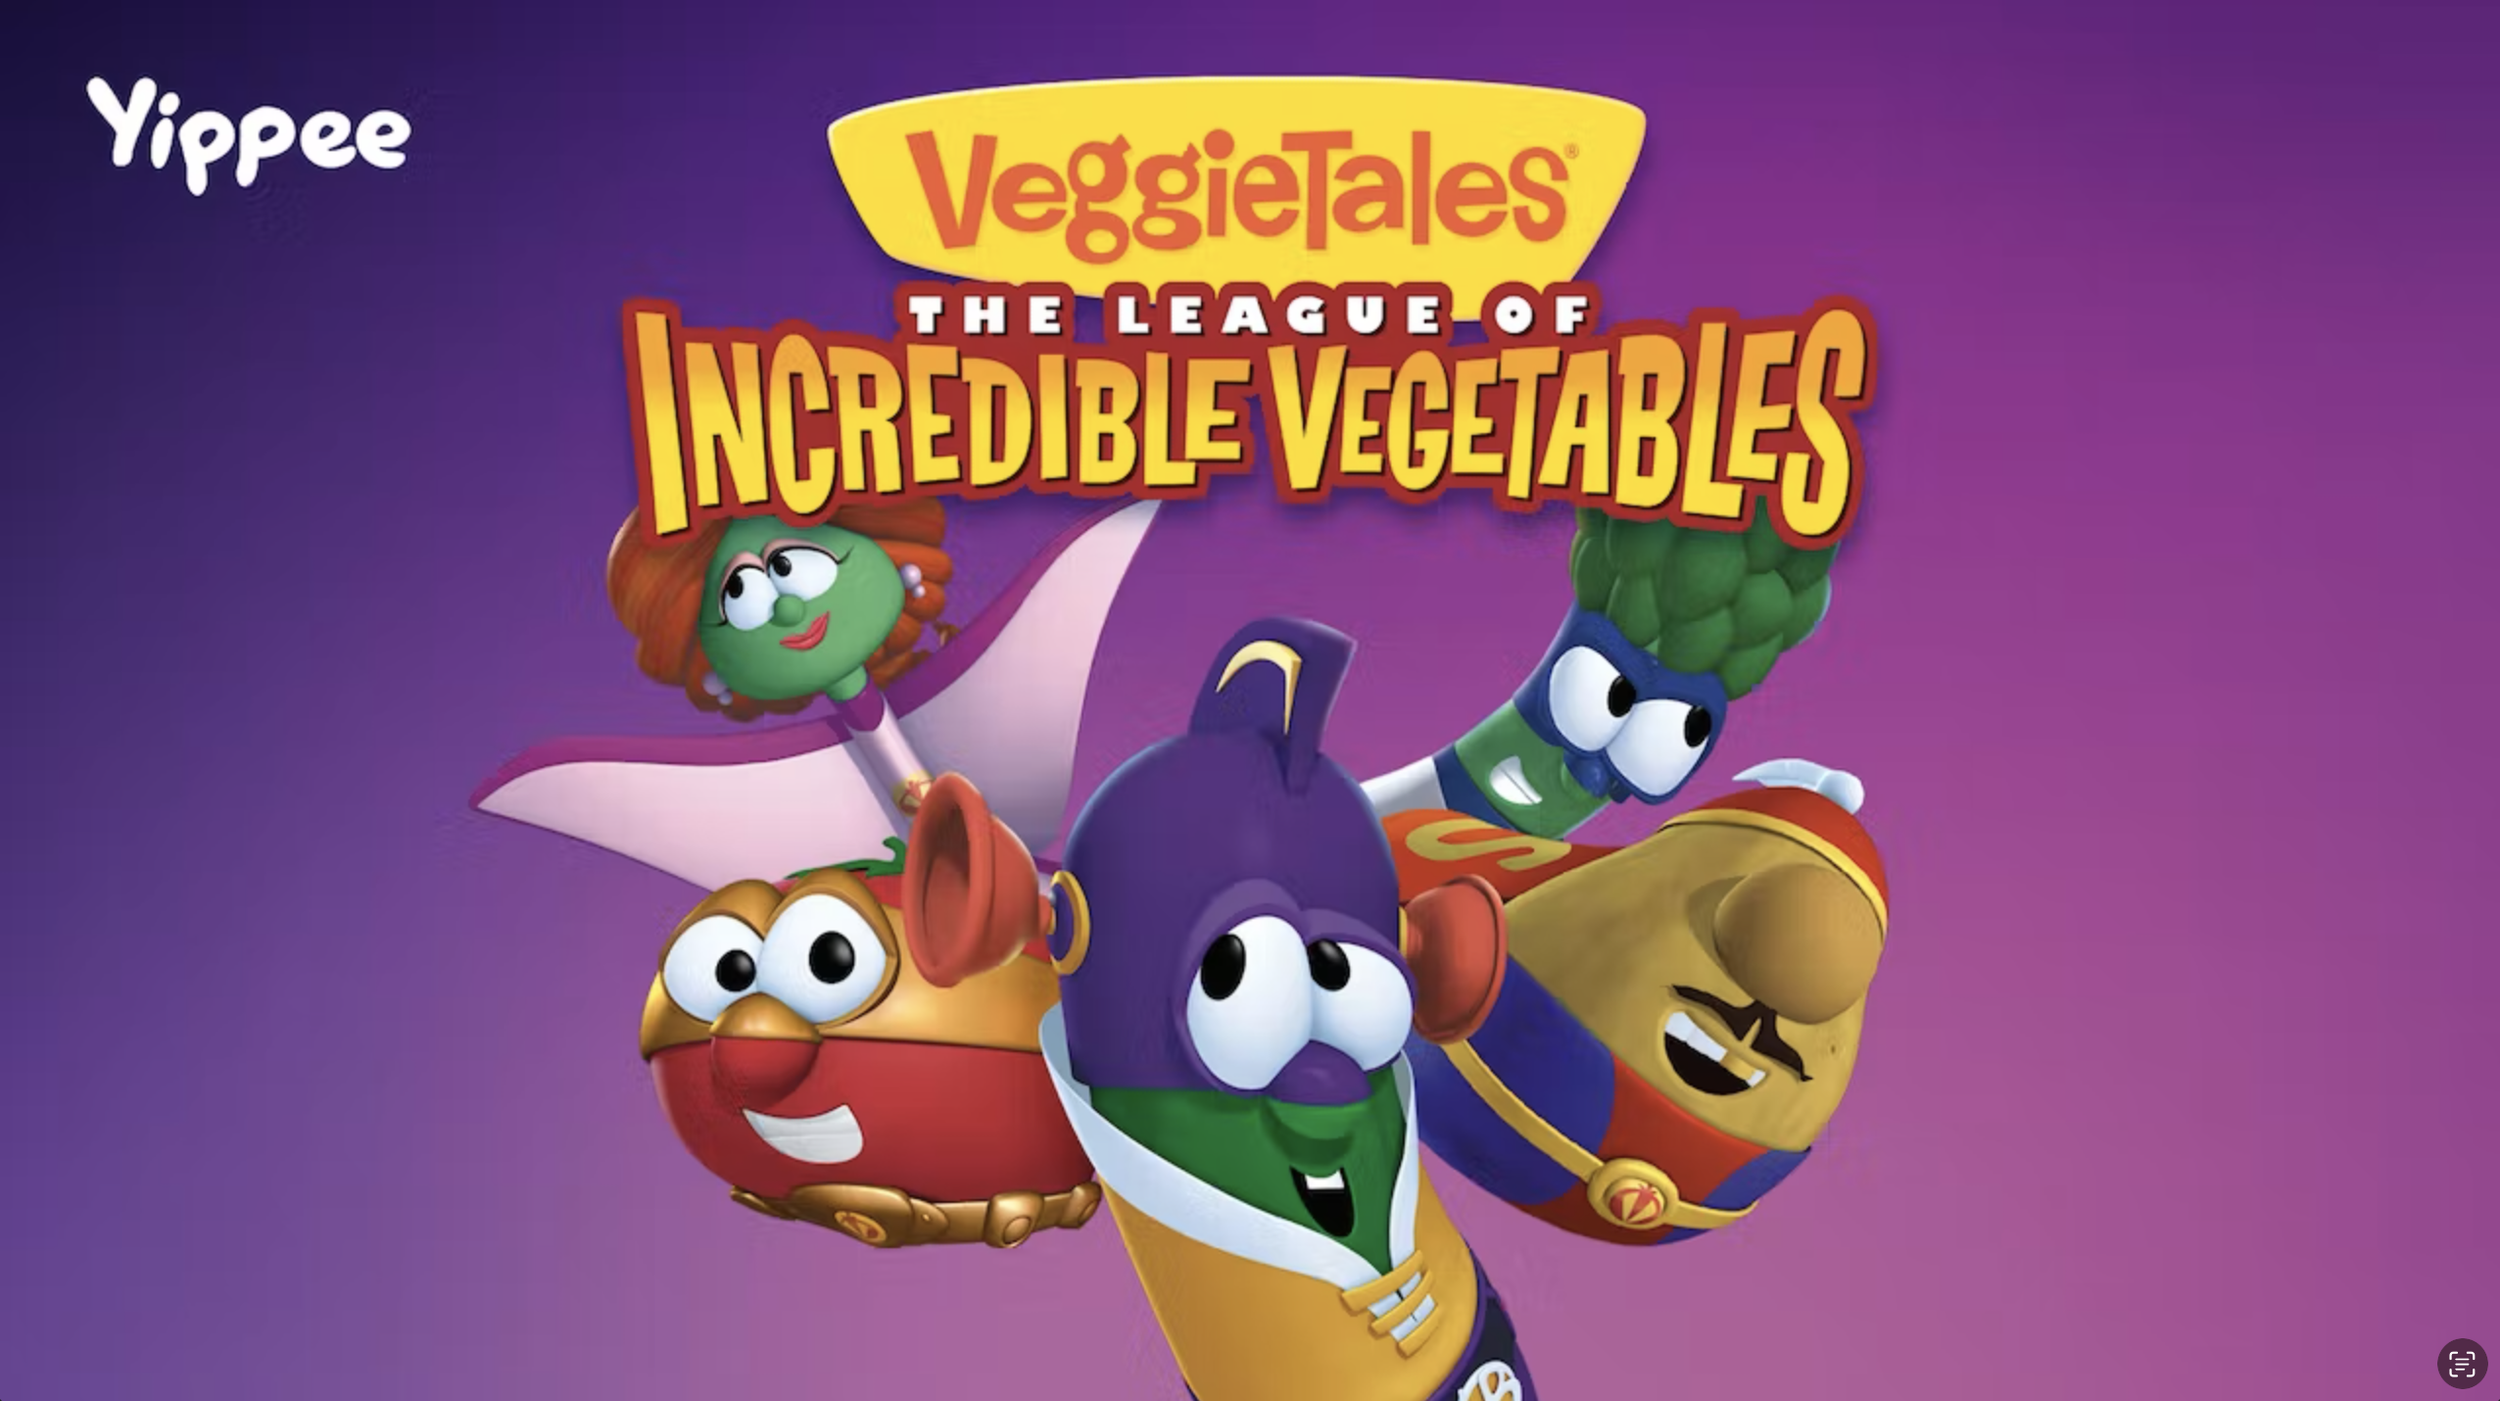 League of Incredible Vegetables Thumbnail.png